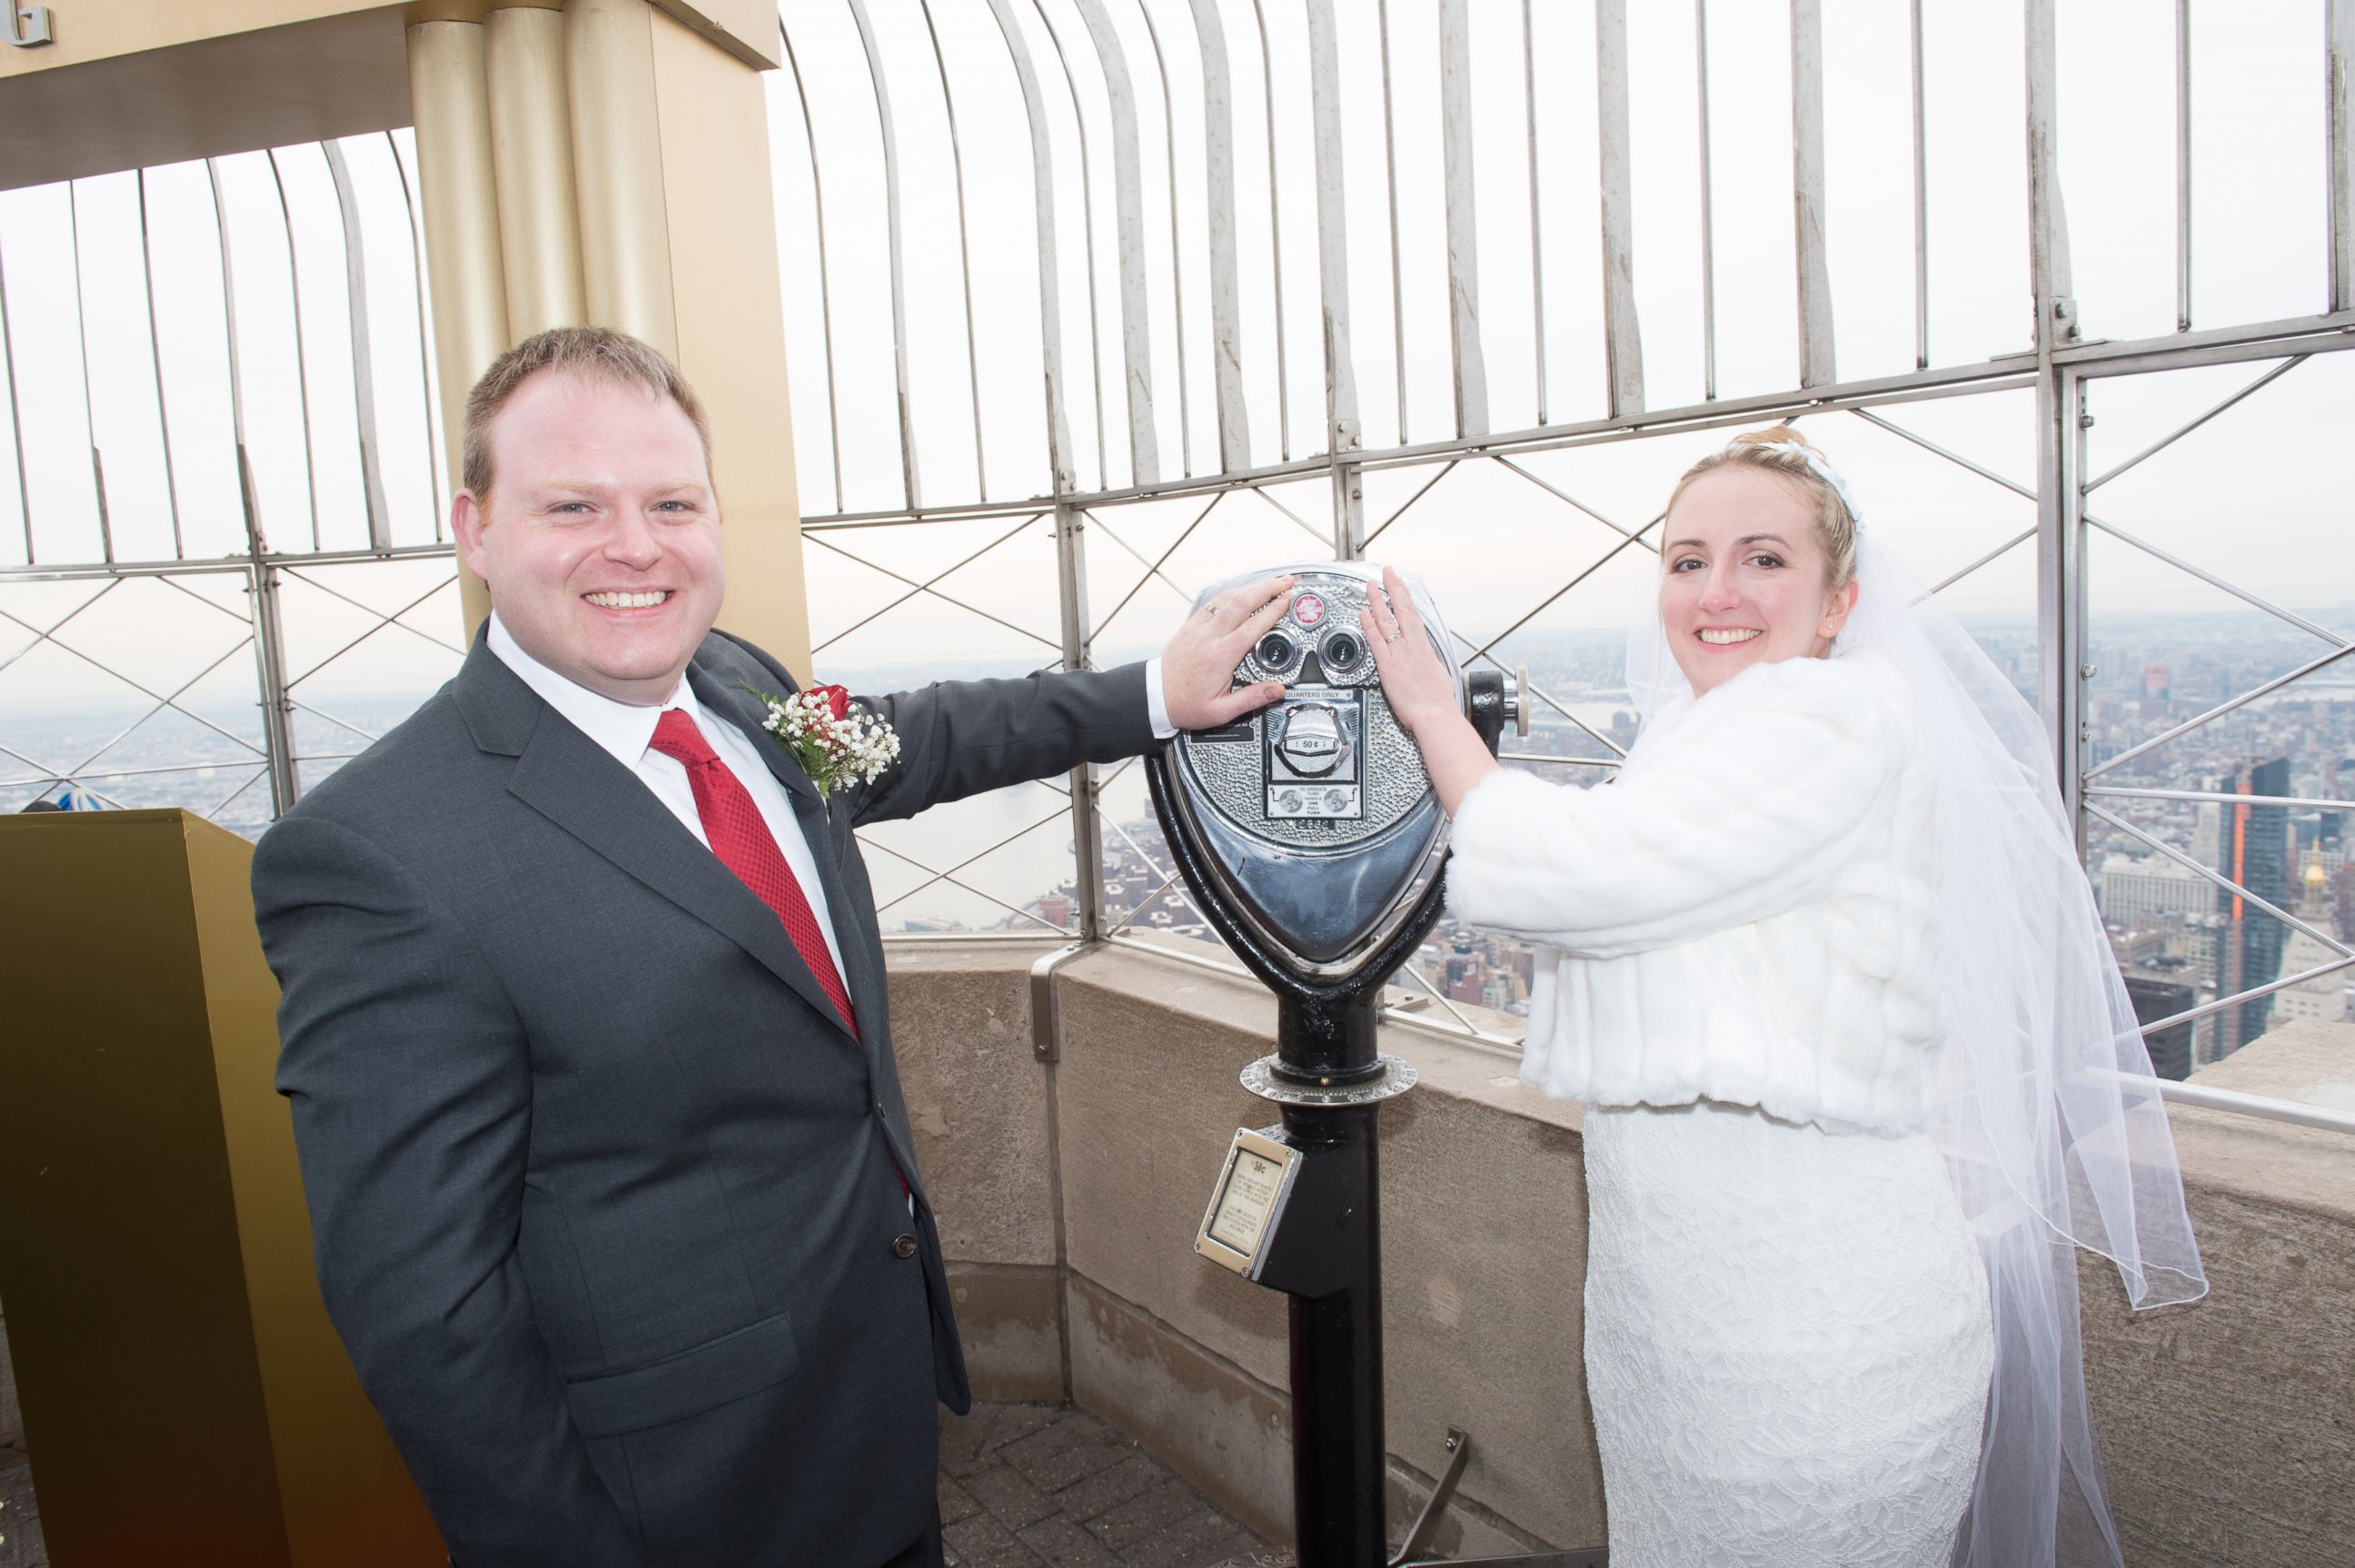 PHOTO: Jennifer Cuatt and Christopher Langmack were married as part of the Empire State Building's 23rd Annual Valentine's Day Weddings contest in New York, Feb. 14, 2017.